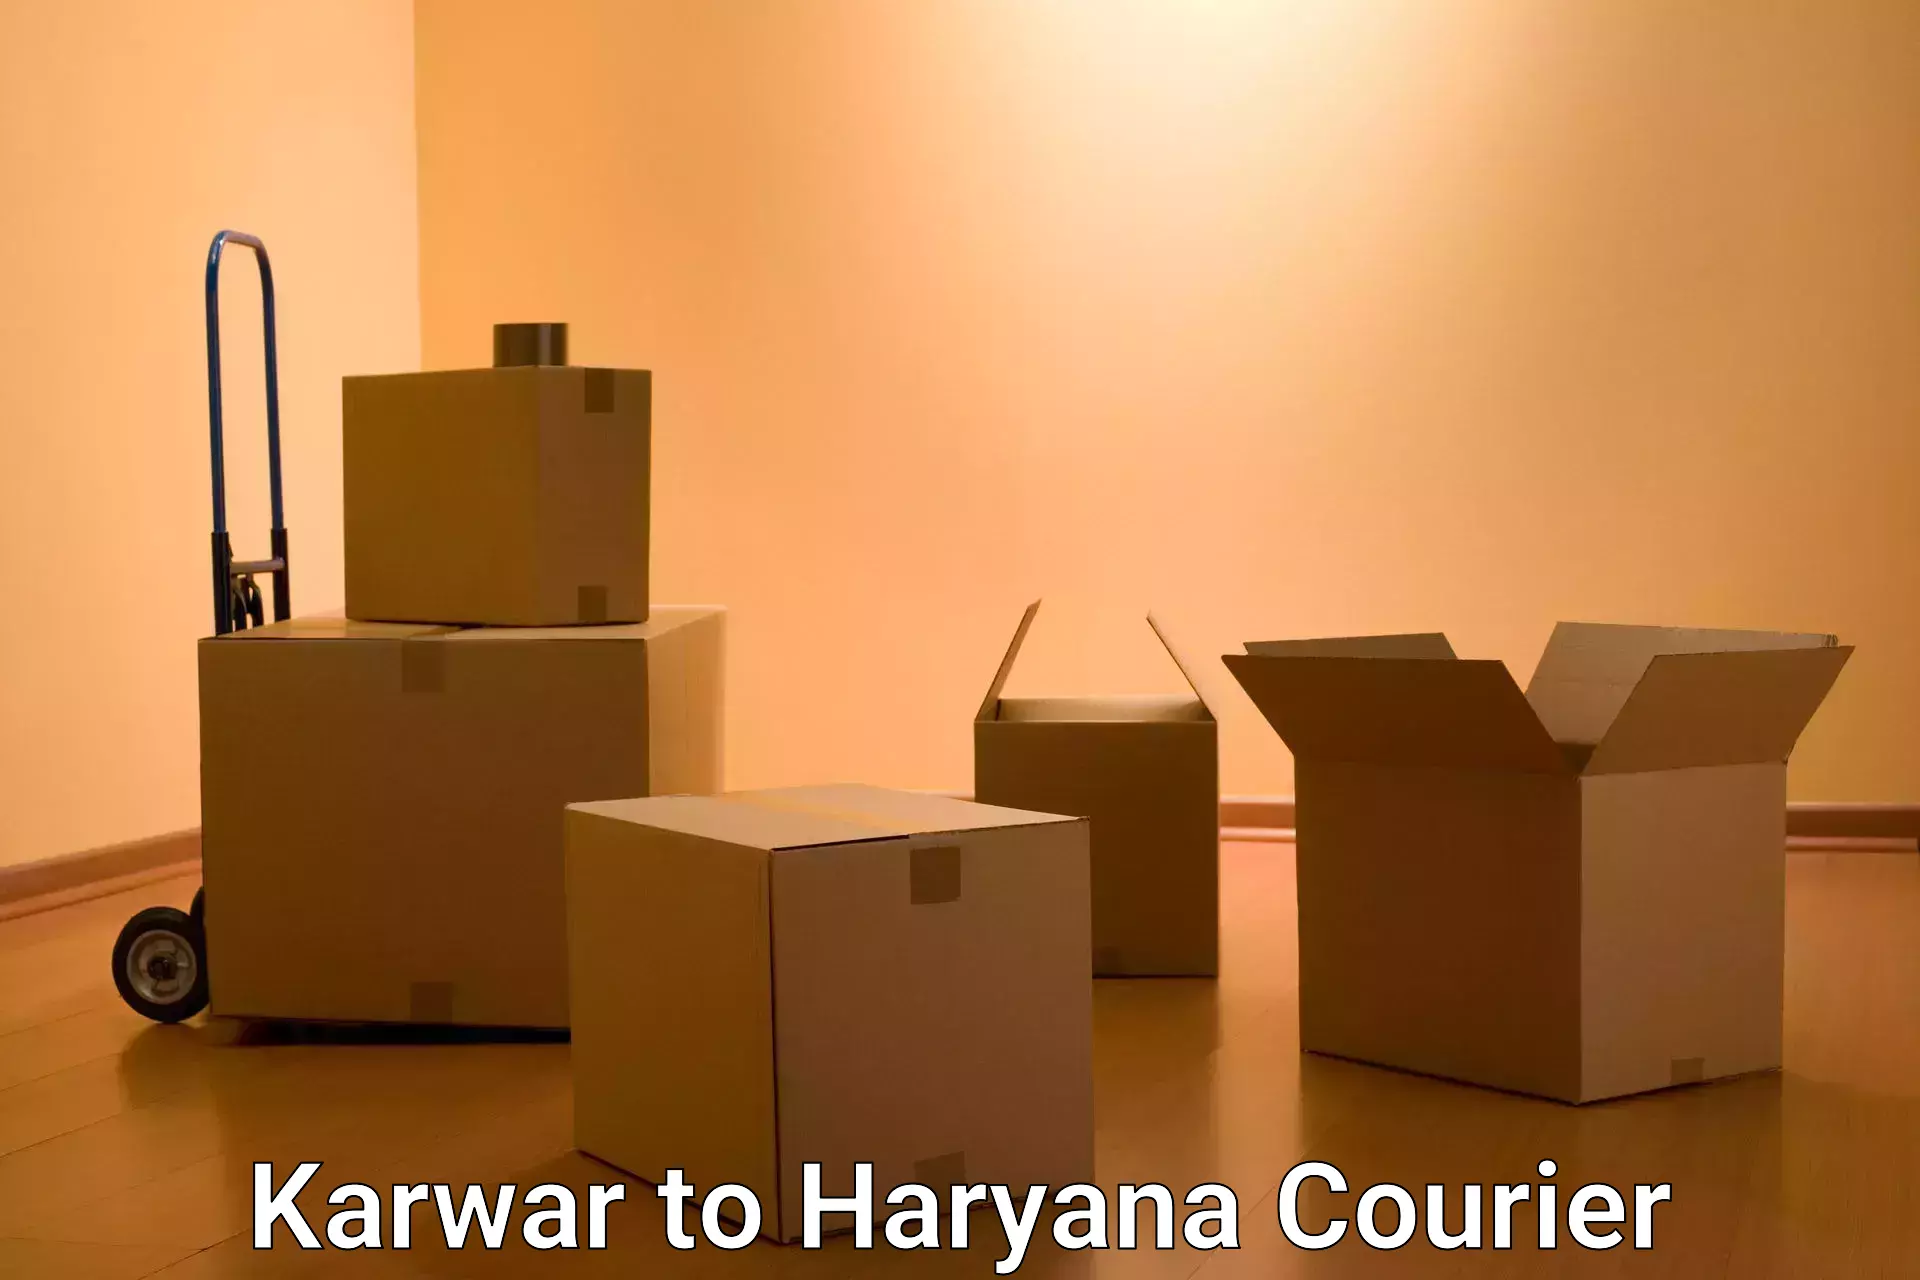 Easy access courier services Karwar to Gurgaon